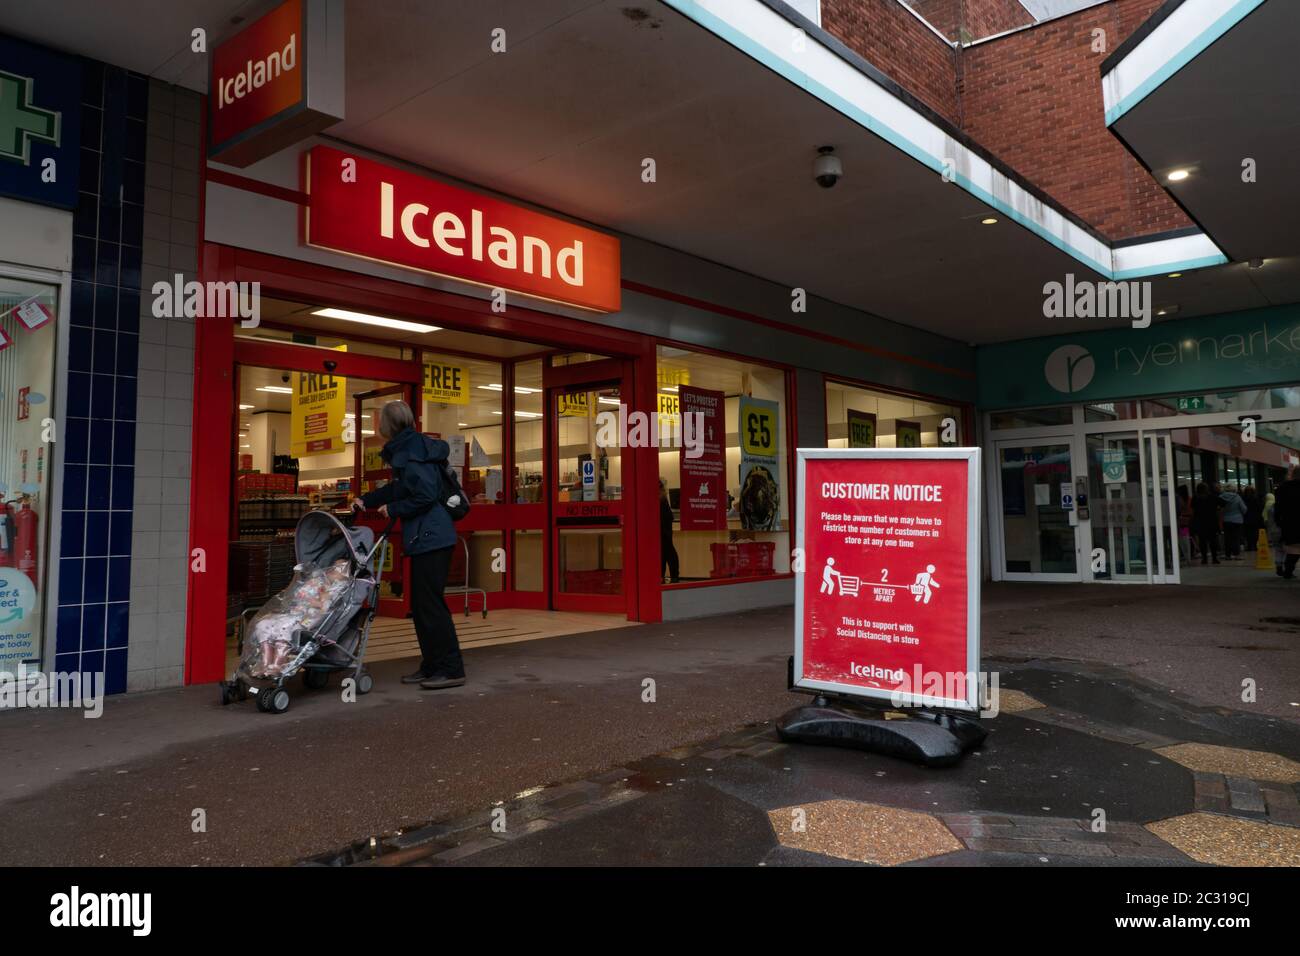 Sign outside of Iceland shop front requesting customers to keep 2m apart. Stourbridge. West Midlands. UK Stock Photo